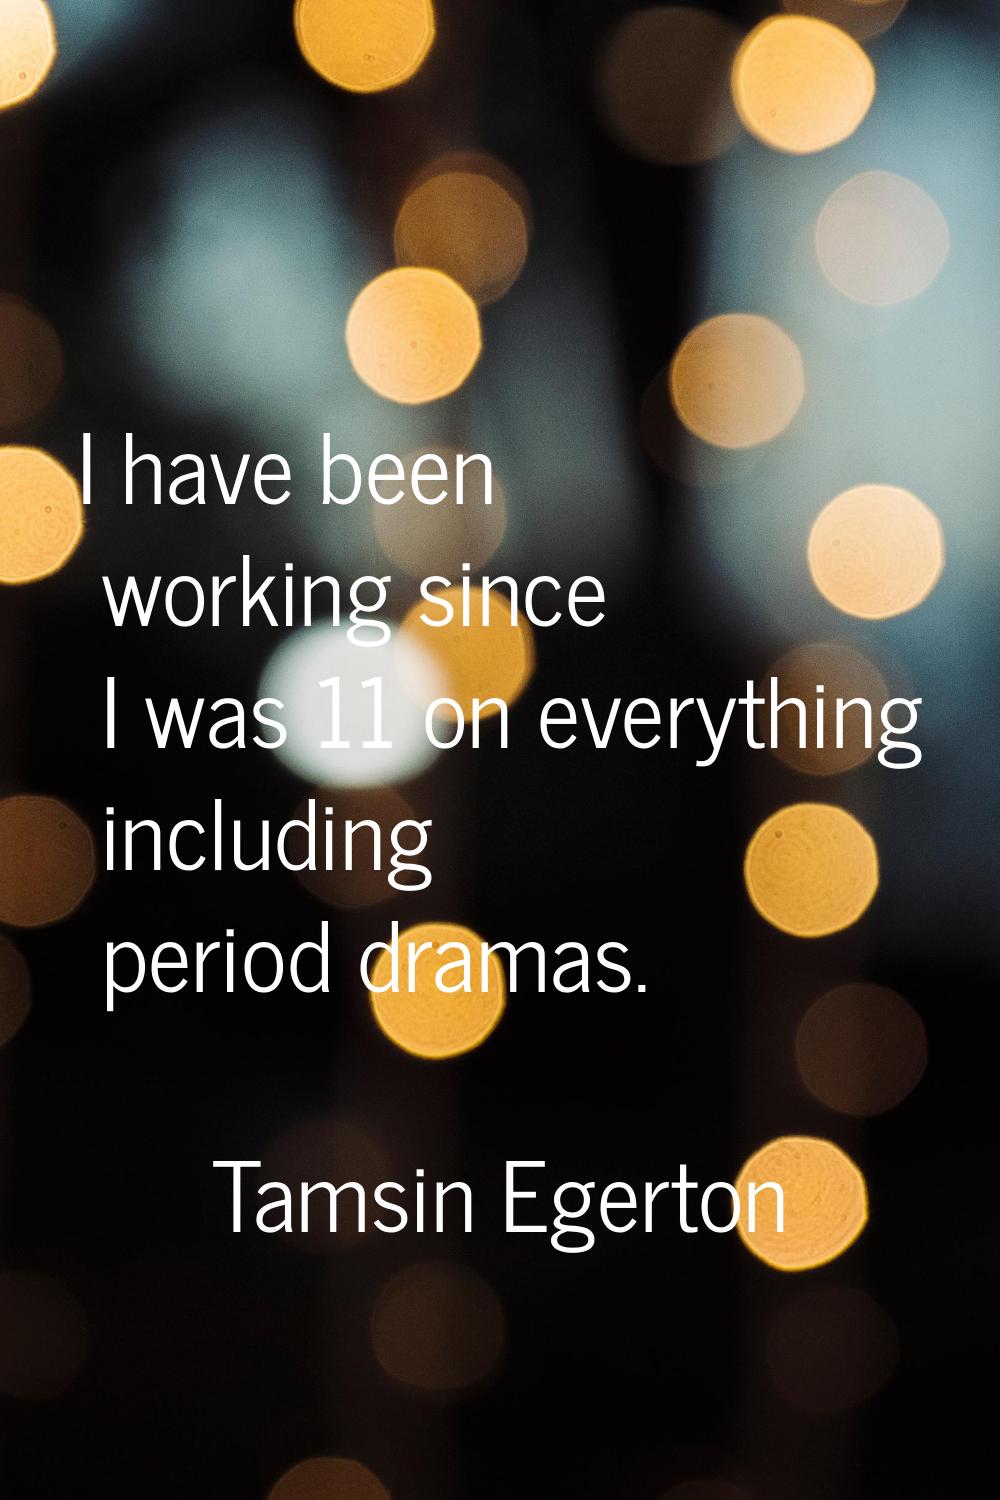 I have been working since I was 11 on everything including period dramas.